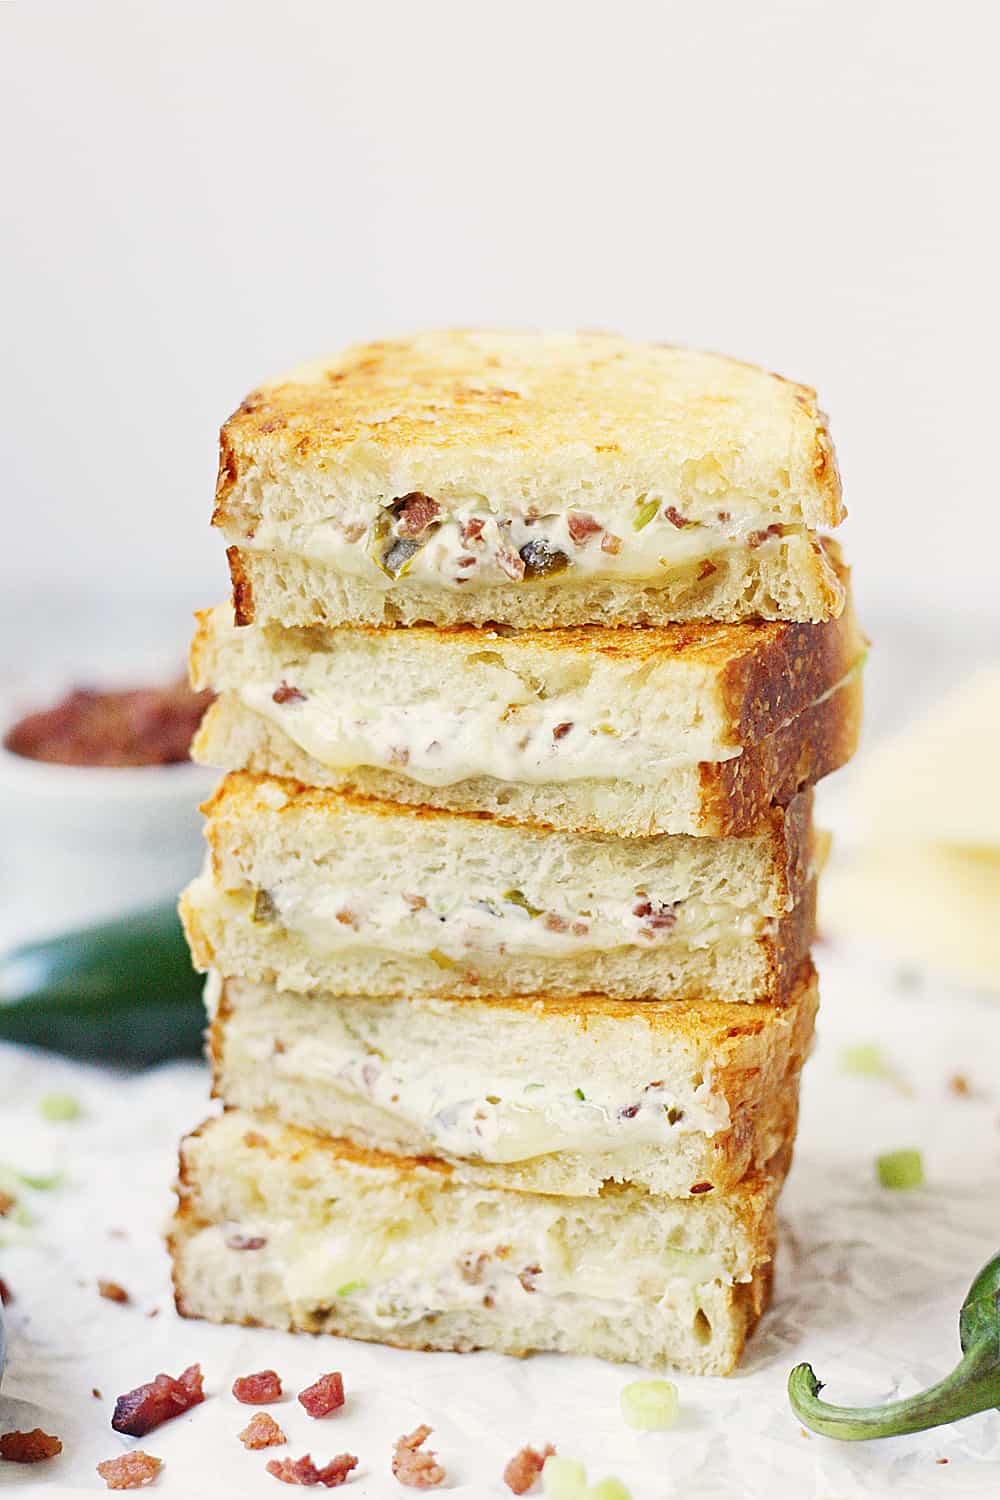 EASY Jalapeno Popper Grilled Cheese Sandwich - This easy jalapeno popper grilled cheese sandwich combines that amazing jalapeno popper flavor with bacon and sharp white cheddar for one irresistible gourmet grilled cheese! #grilledcheese #jalapeno #jalapenopopper #sandwich #grilledcheesesandwich #cheese #easyrecipe #recipe #halfscratched #maindish #savory